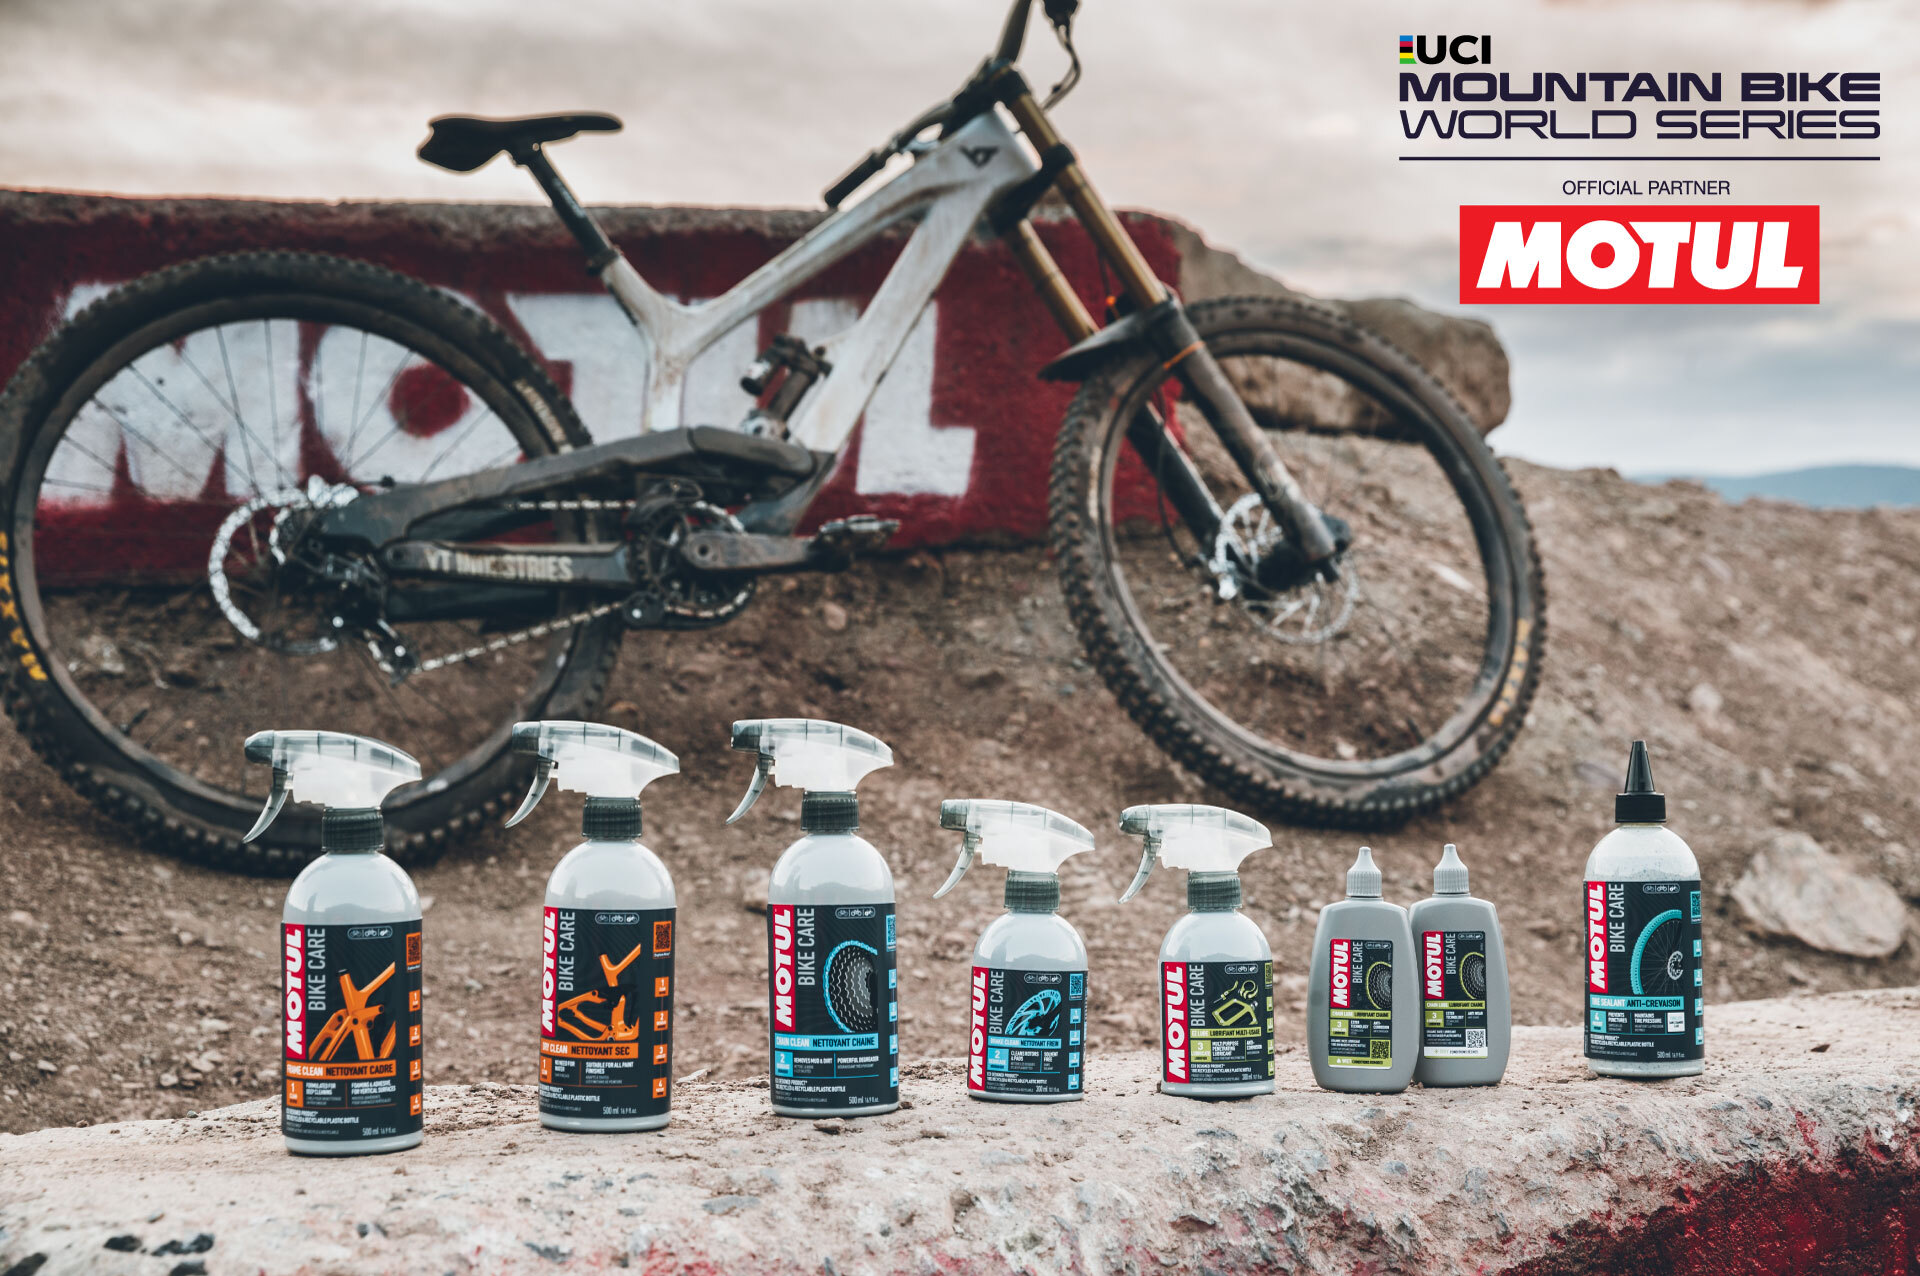 THE UCI MOUNTAIN BIKE WORLD SERIES WELCOMES MOTUL AS ITS NEW OFFICIAL BIKE CARE PARTNER